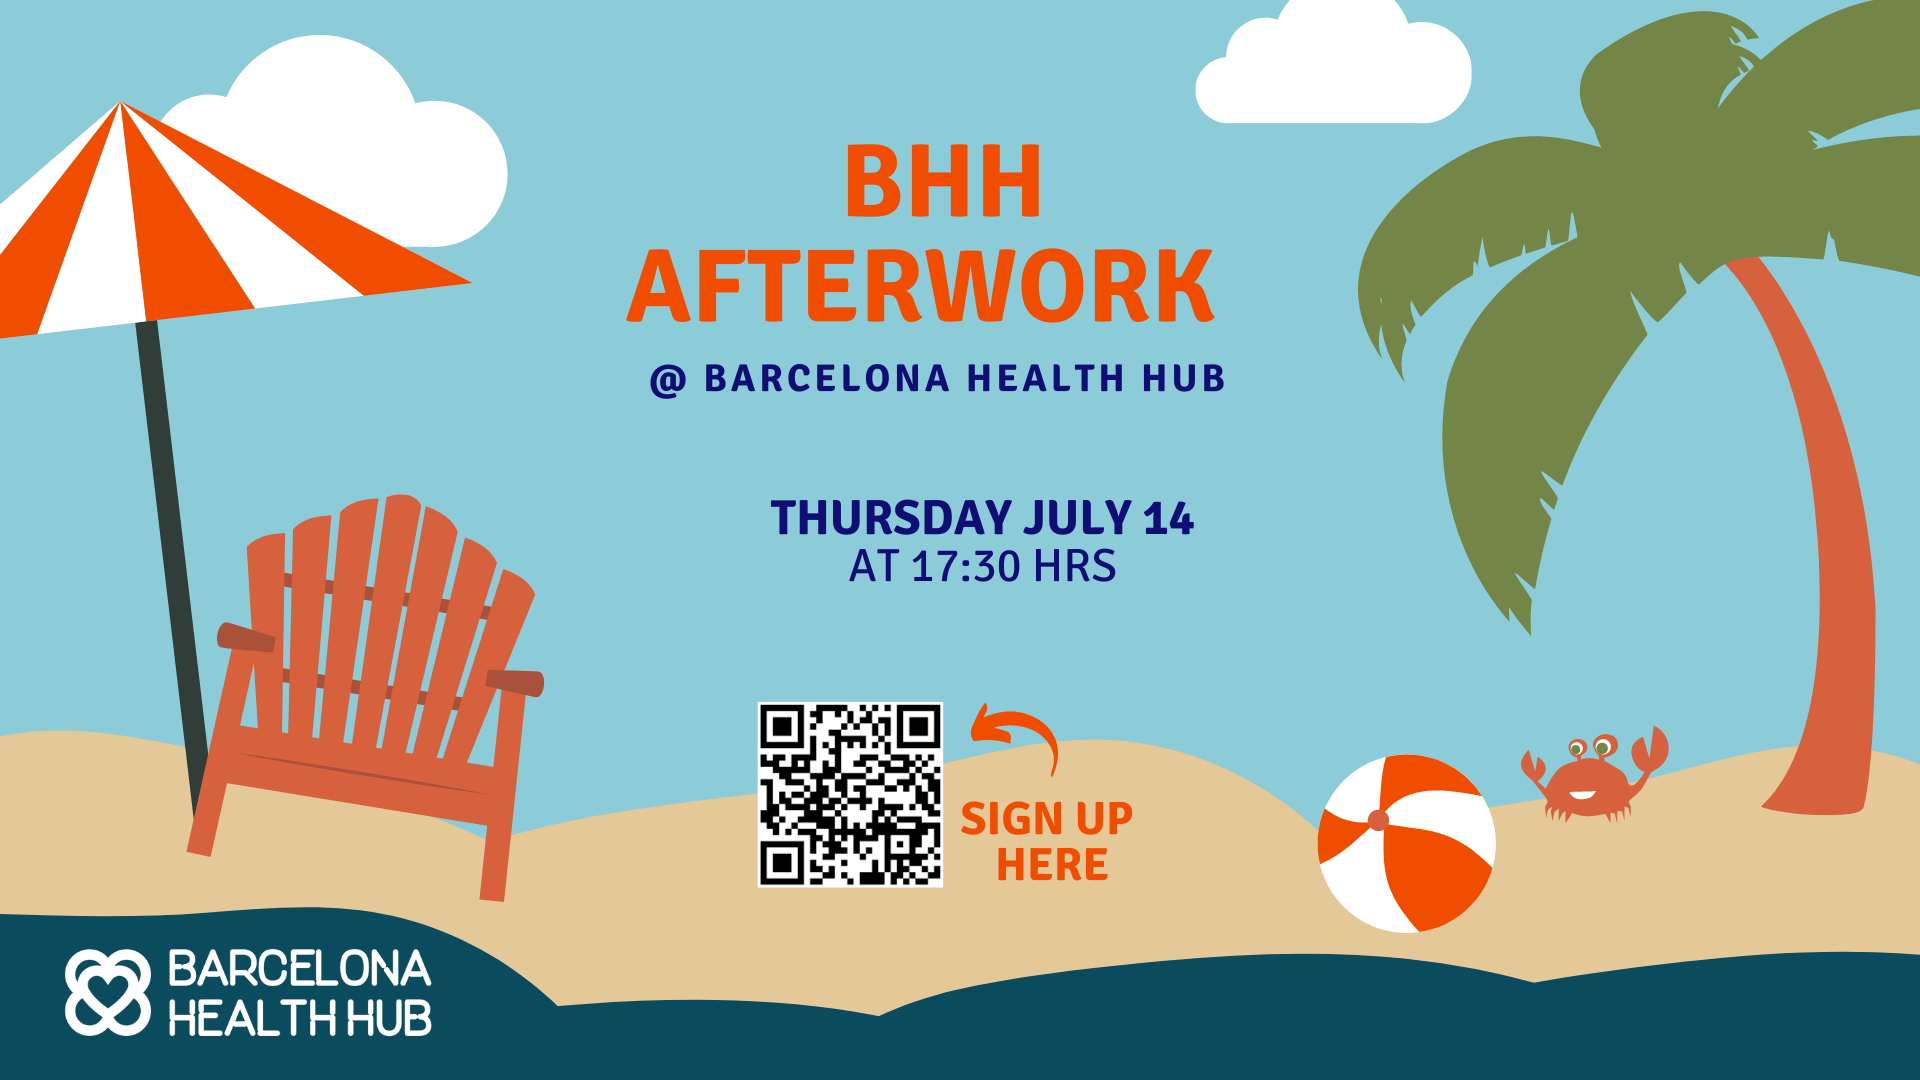 BHH hosts a brand new BHH Afterwork on July 14th!